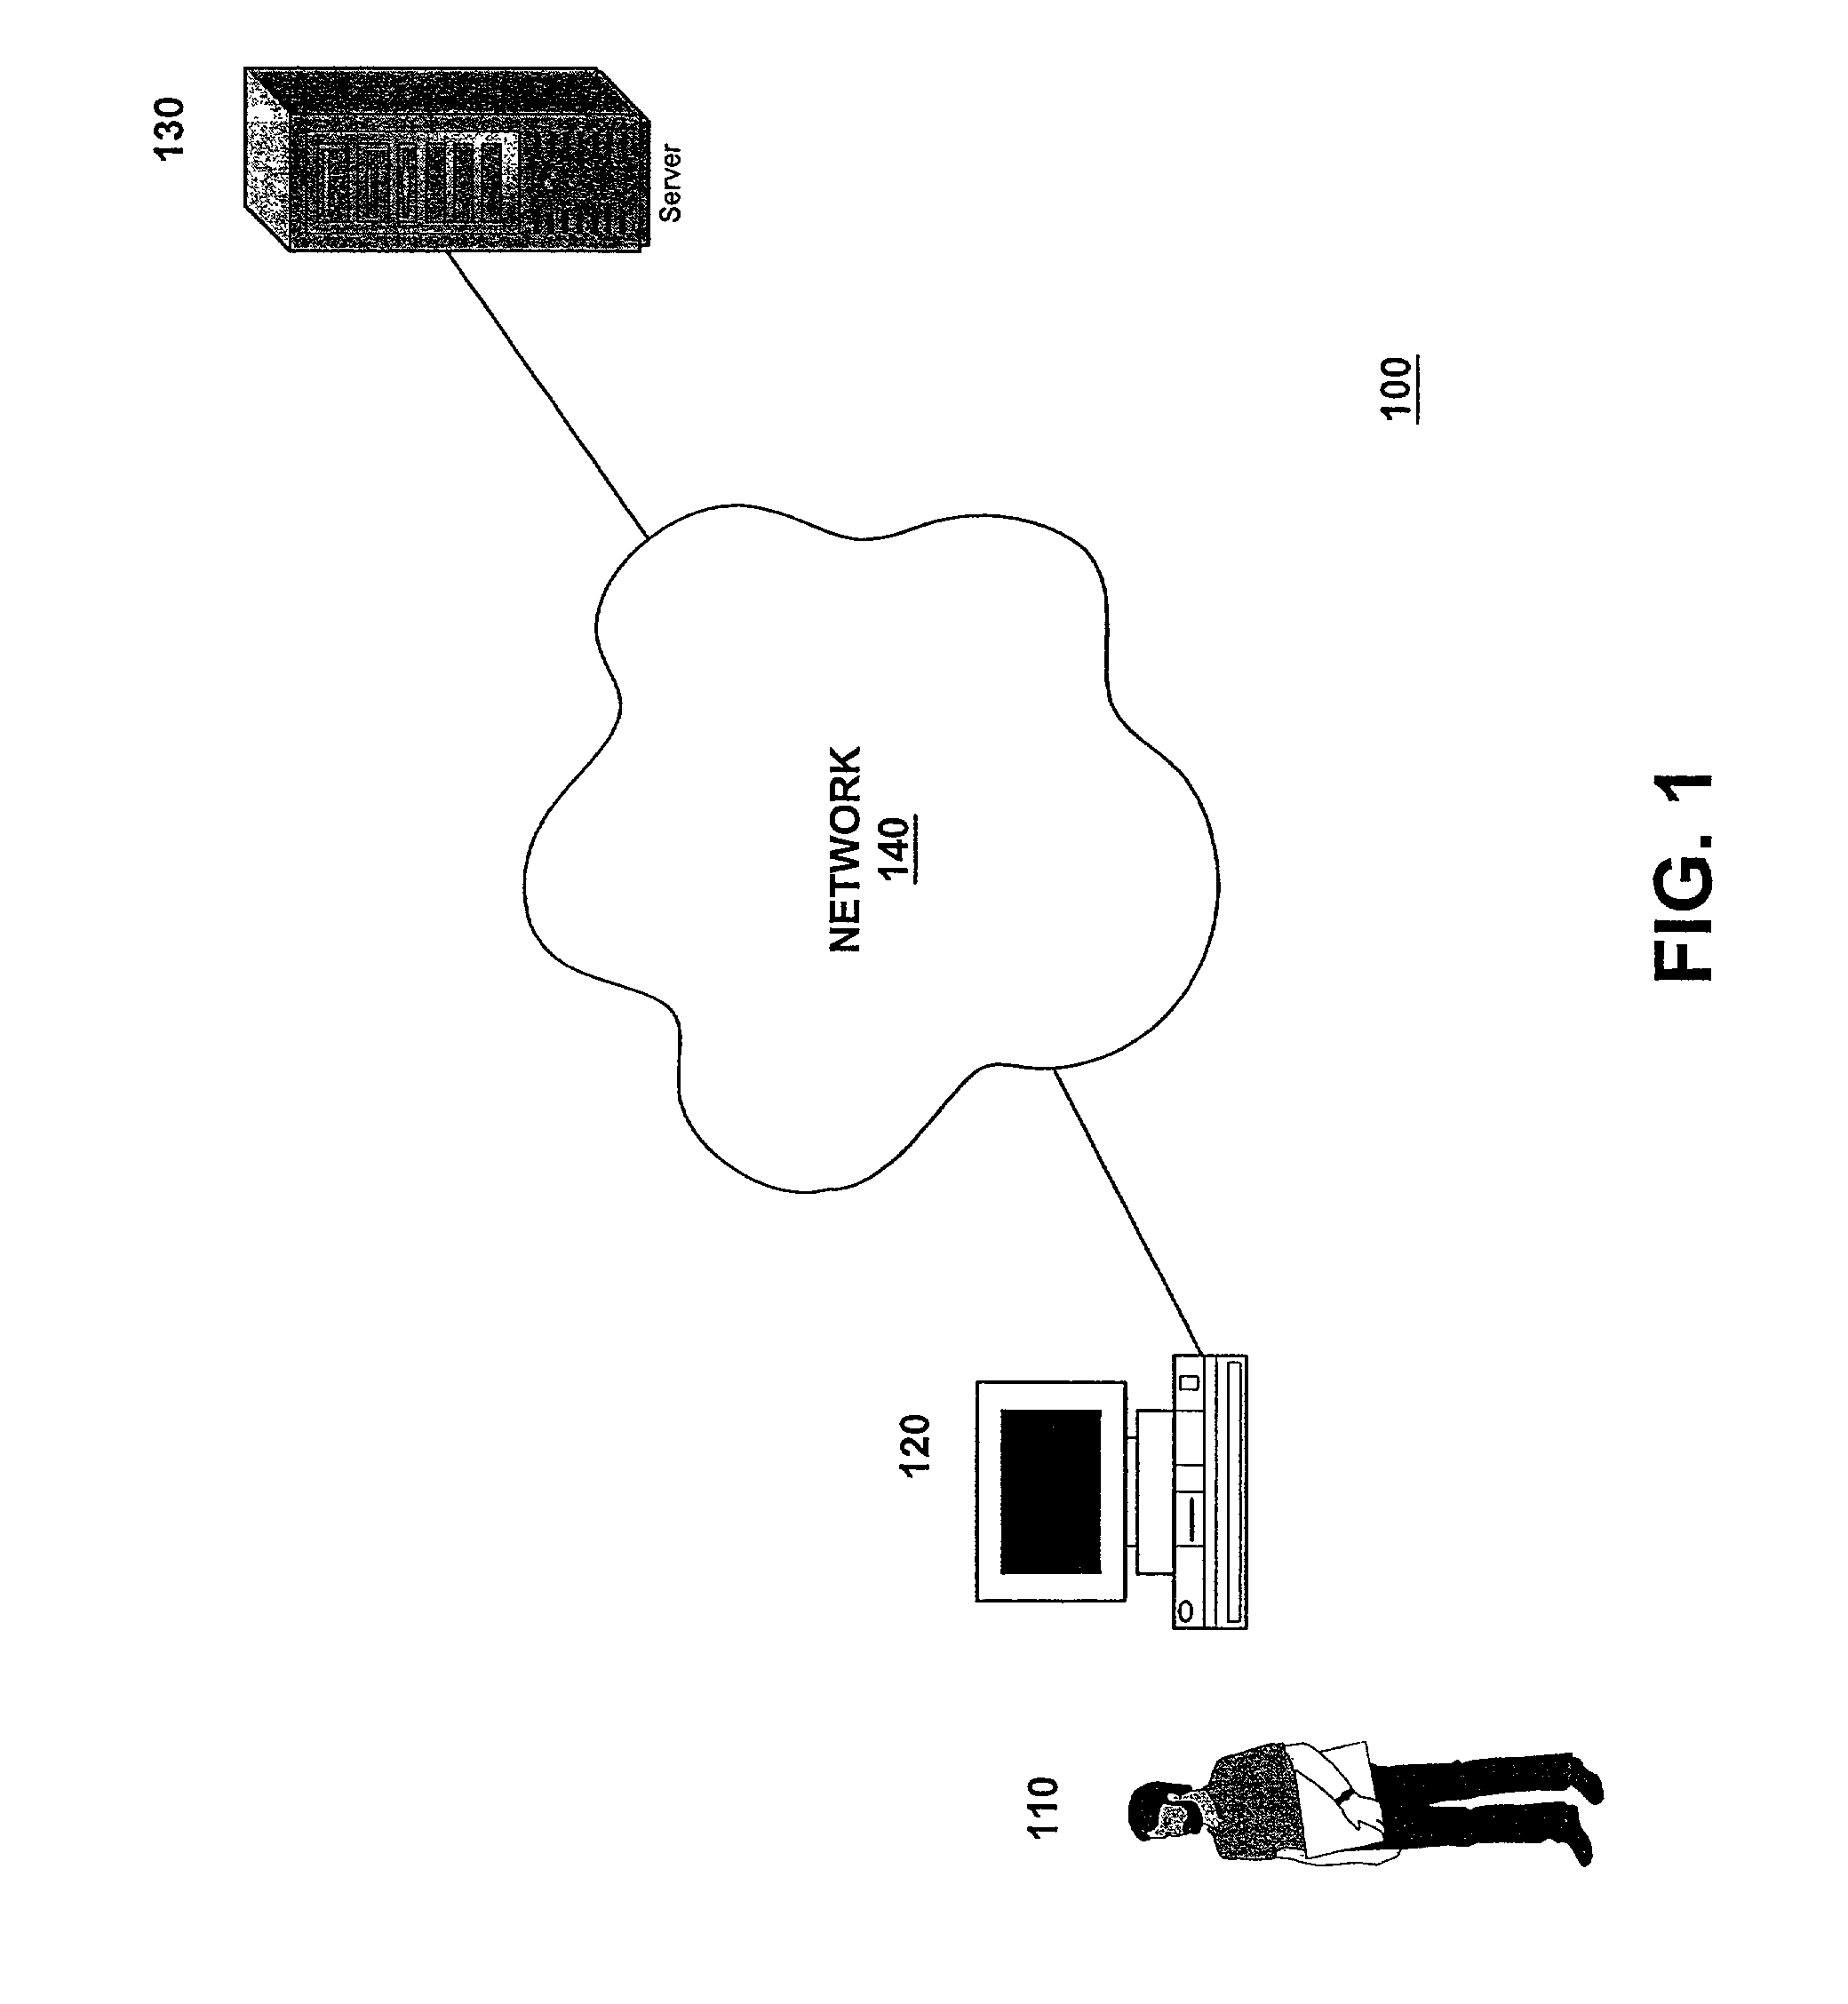 System and method for web browsing